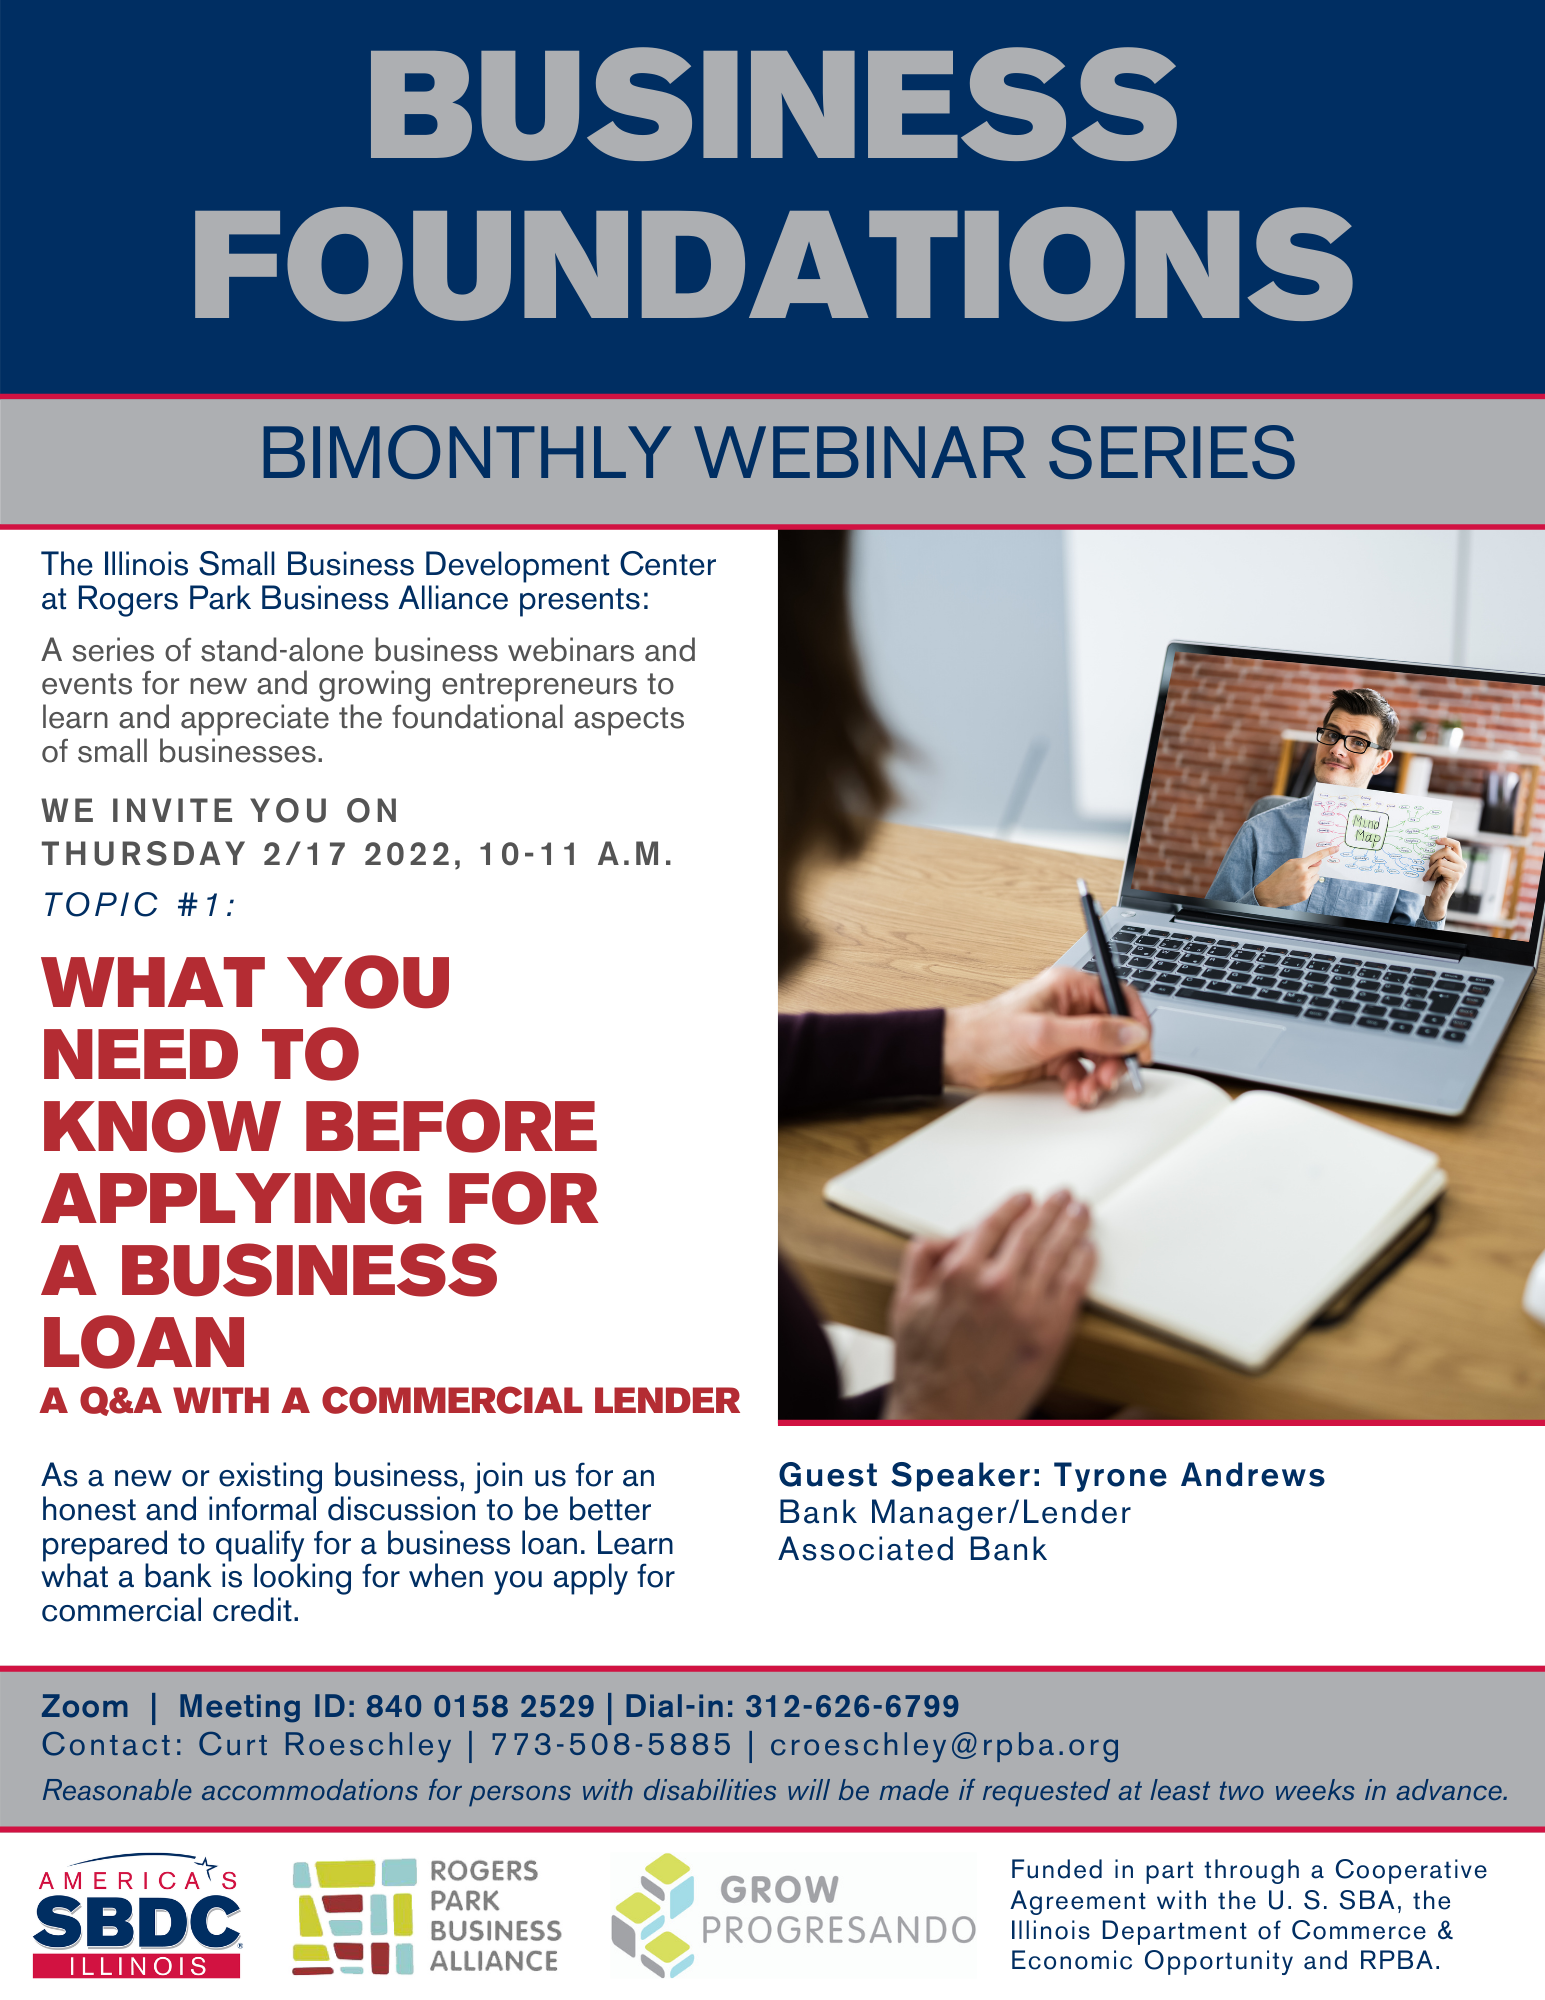 Business Foundations | What You Need to Know Before Applying for a Business Loan, rogers-park-business-alliance